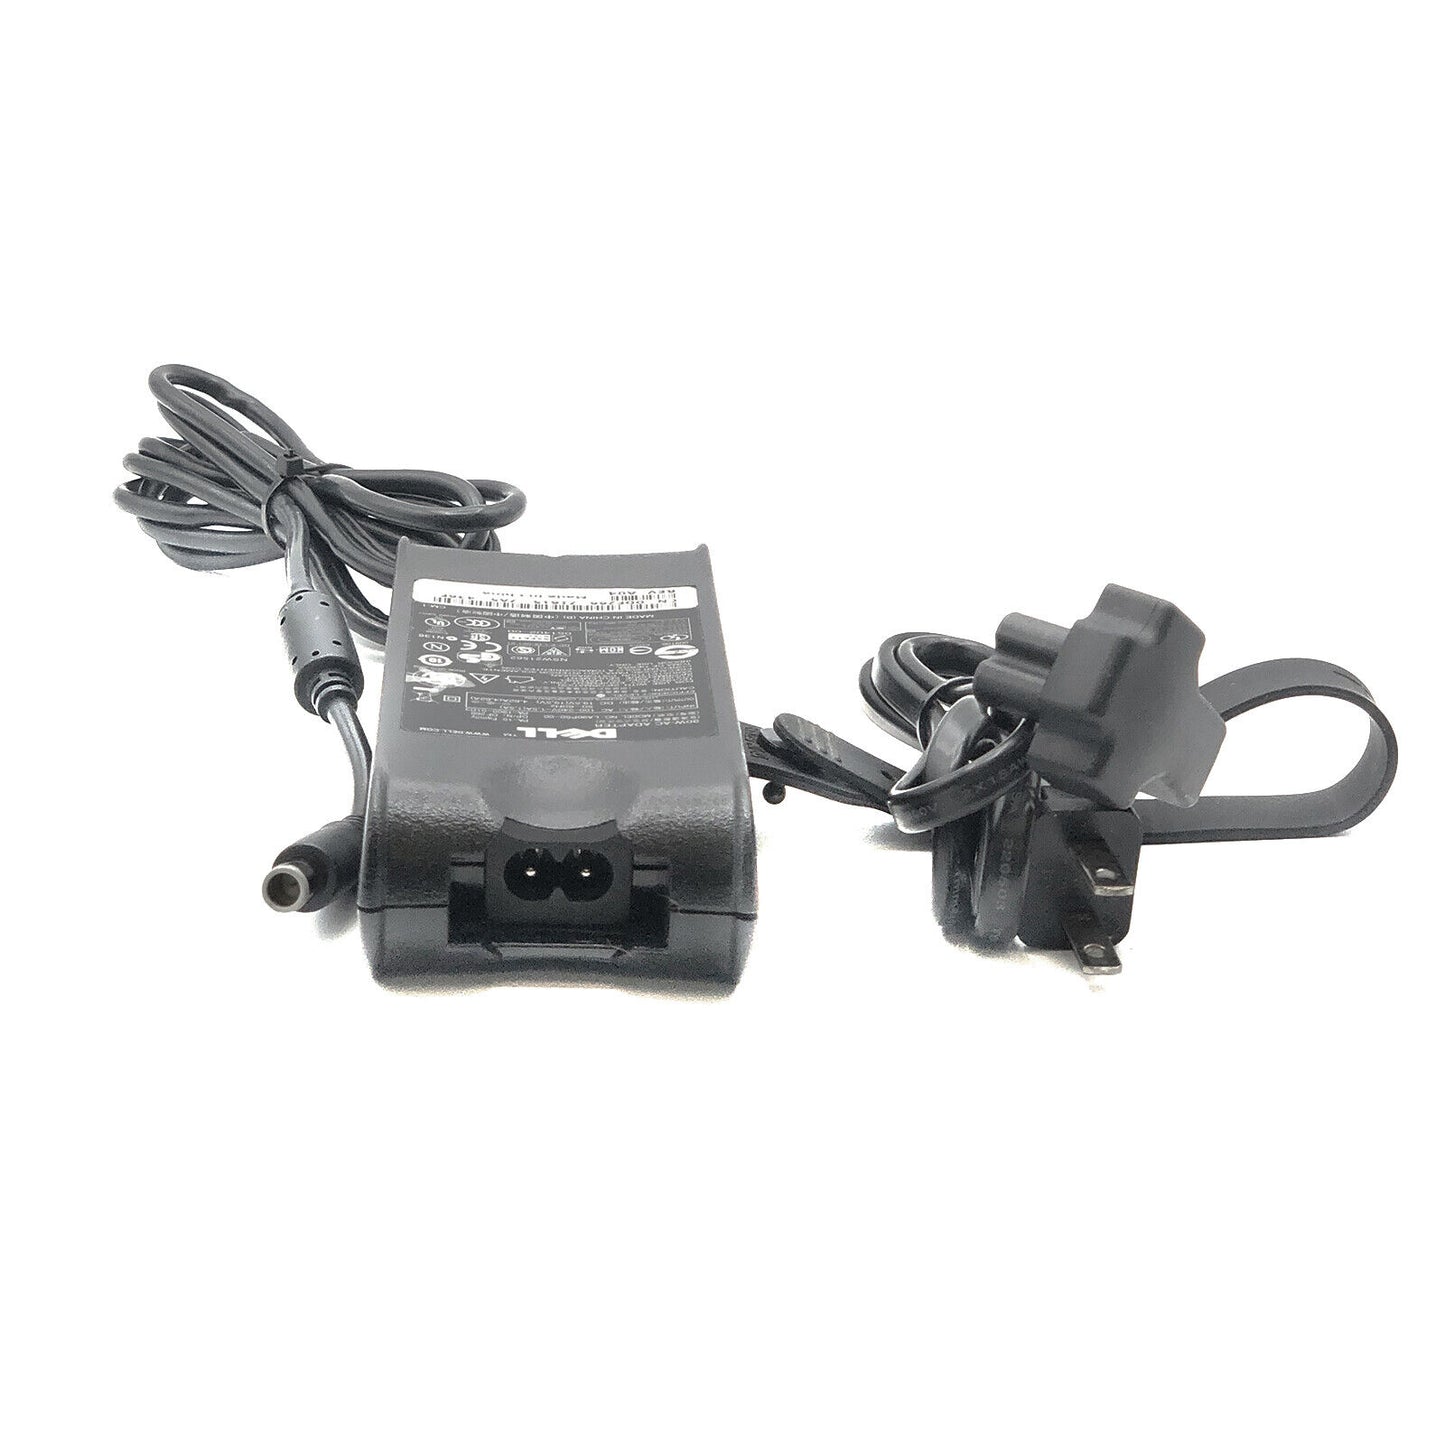 90W Dell OEM Power Charger for Latitude Laptop E5450 E5550 E5470 E5570 with cord